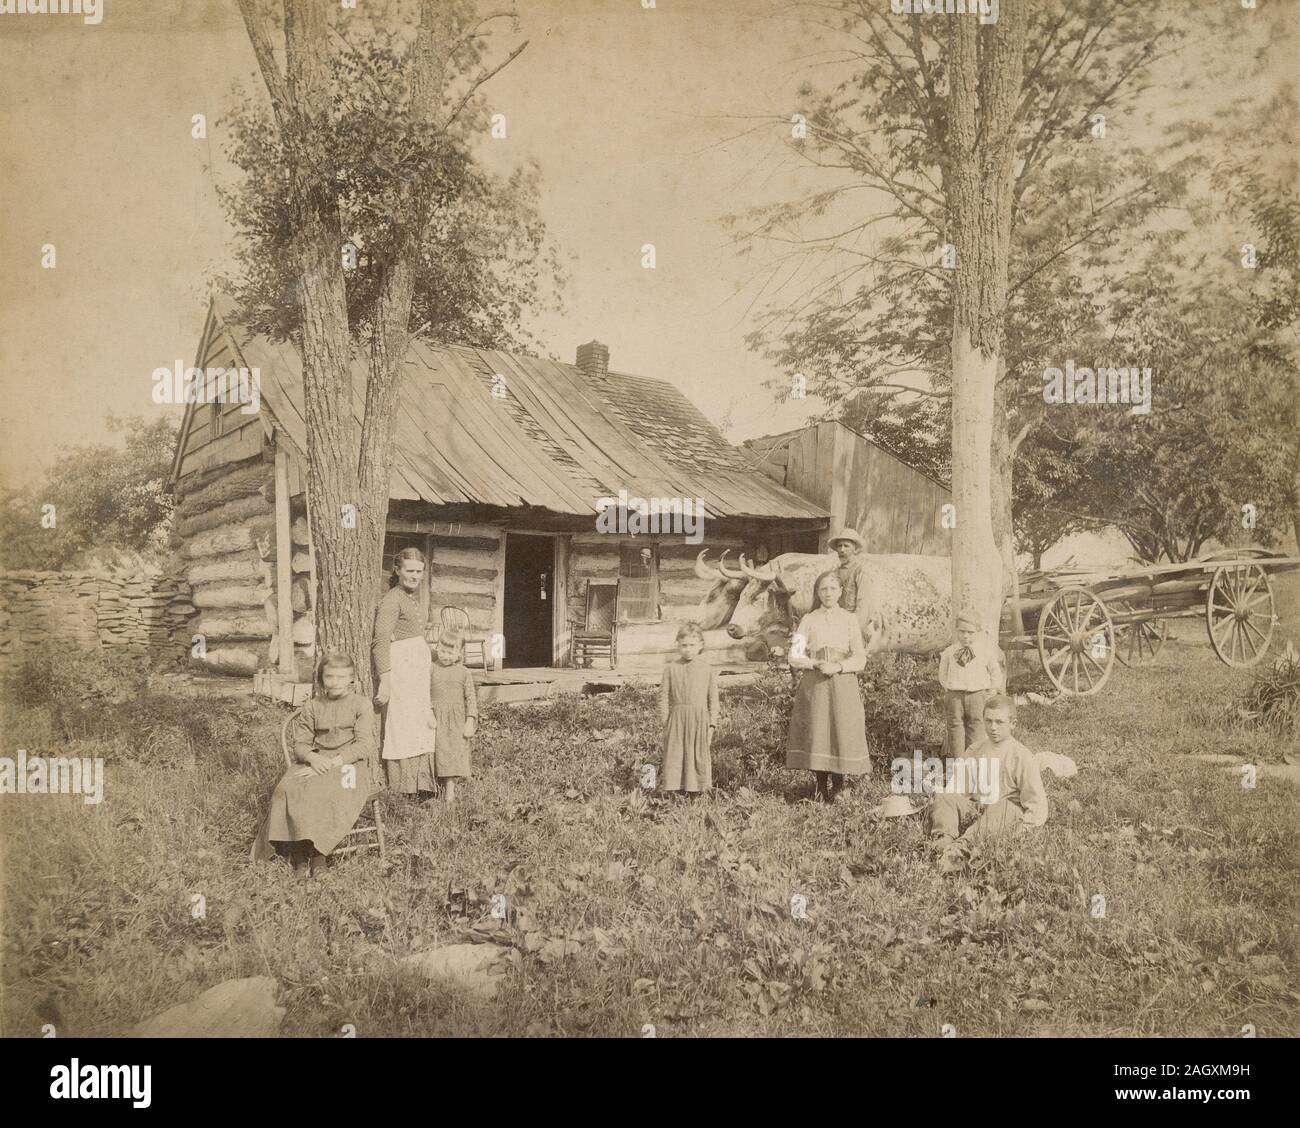 Antique 1890 photograph, “family and home in New York state near Binghamton.” SOURCE: ORIGINAL PHOTOGRAPH Stock Photo